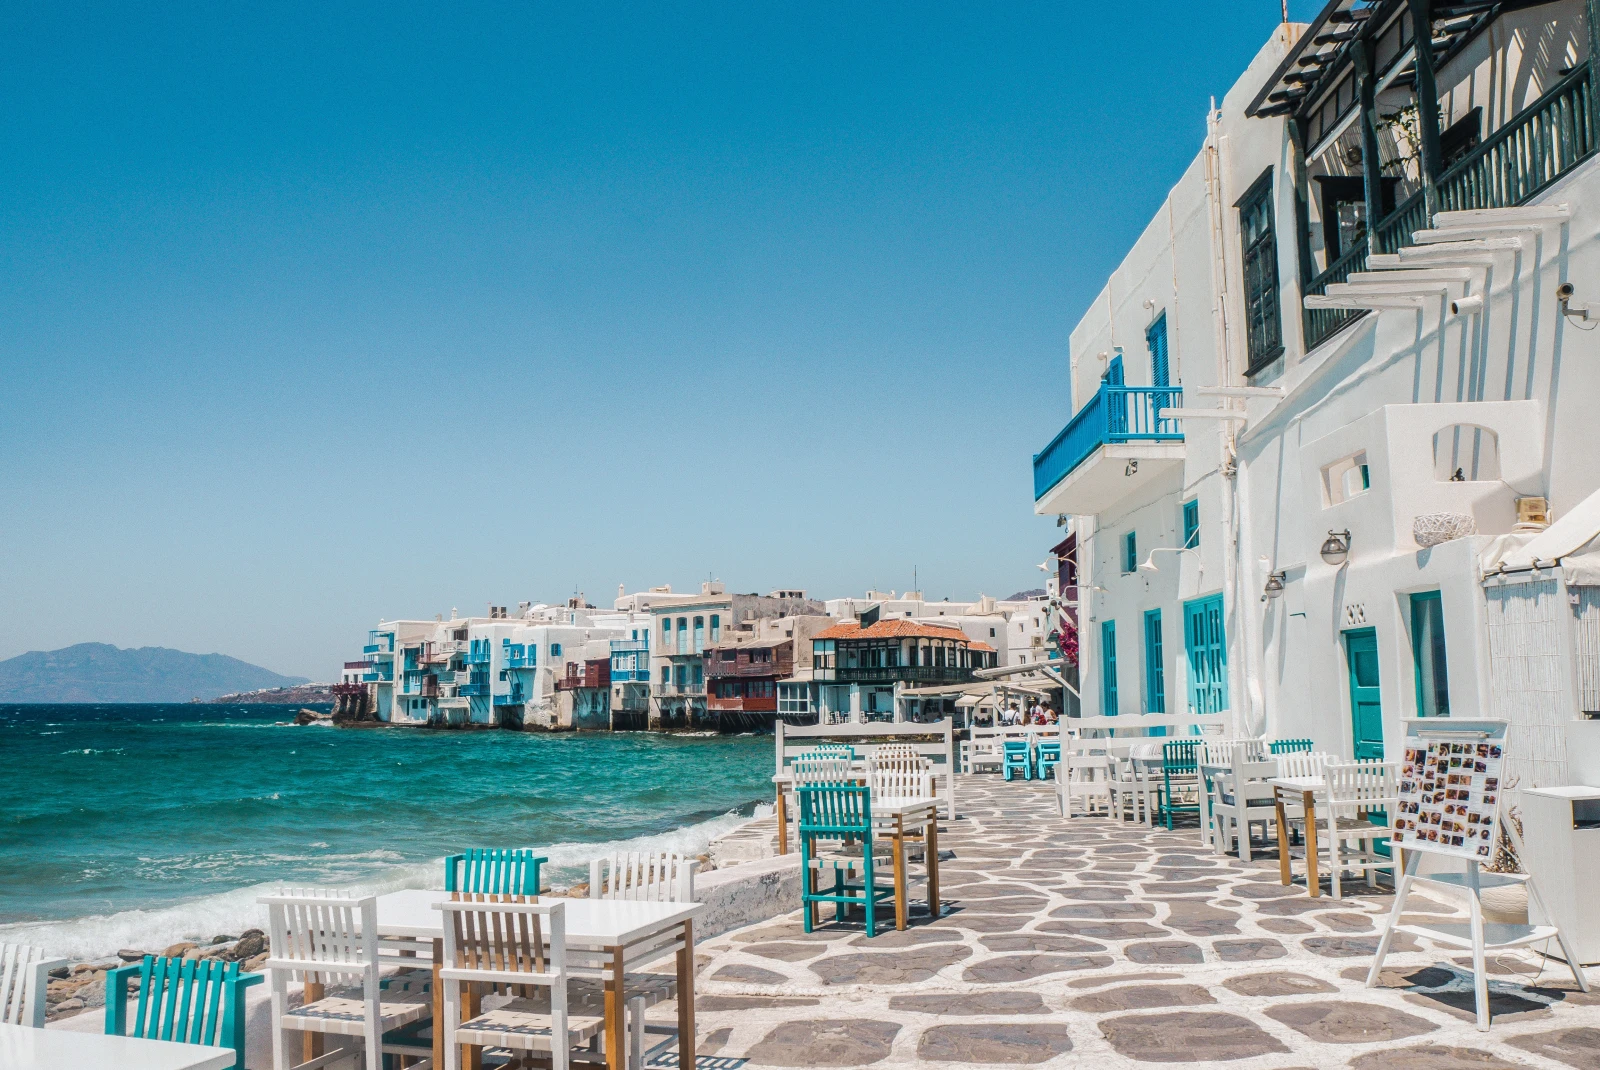 Island Hopping Around the Aegean Sea, Greece - Places to eat & drink